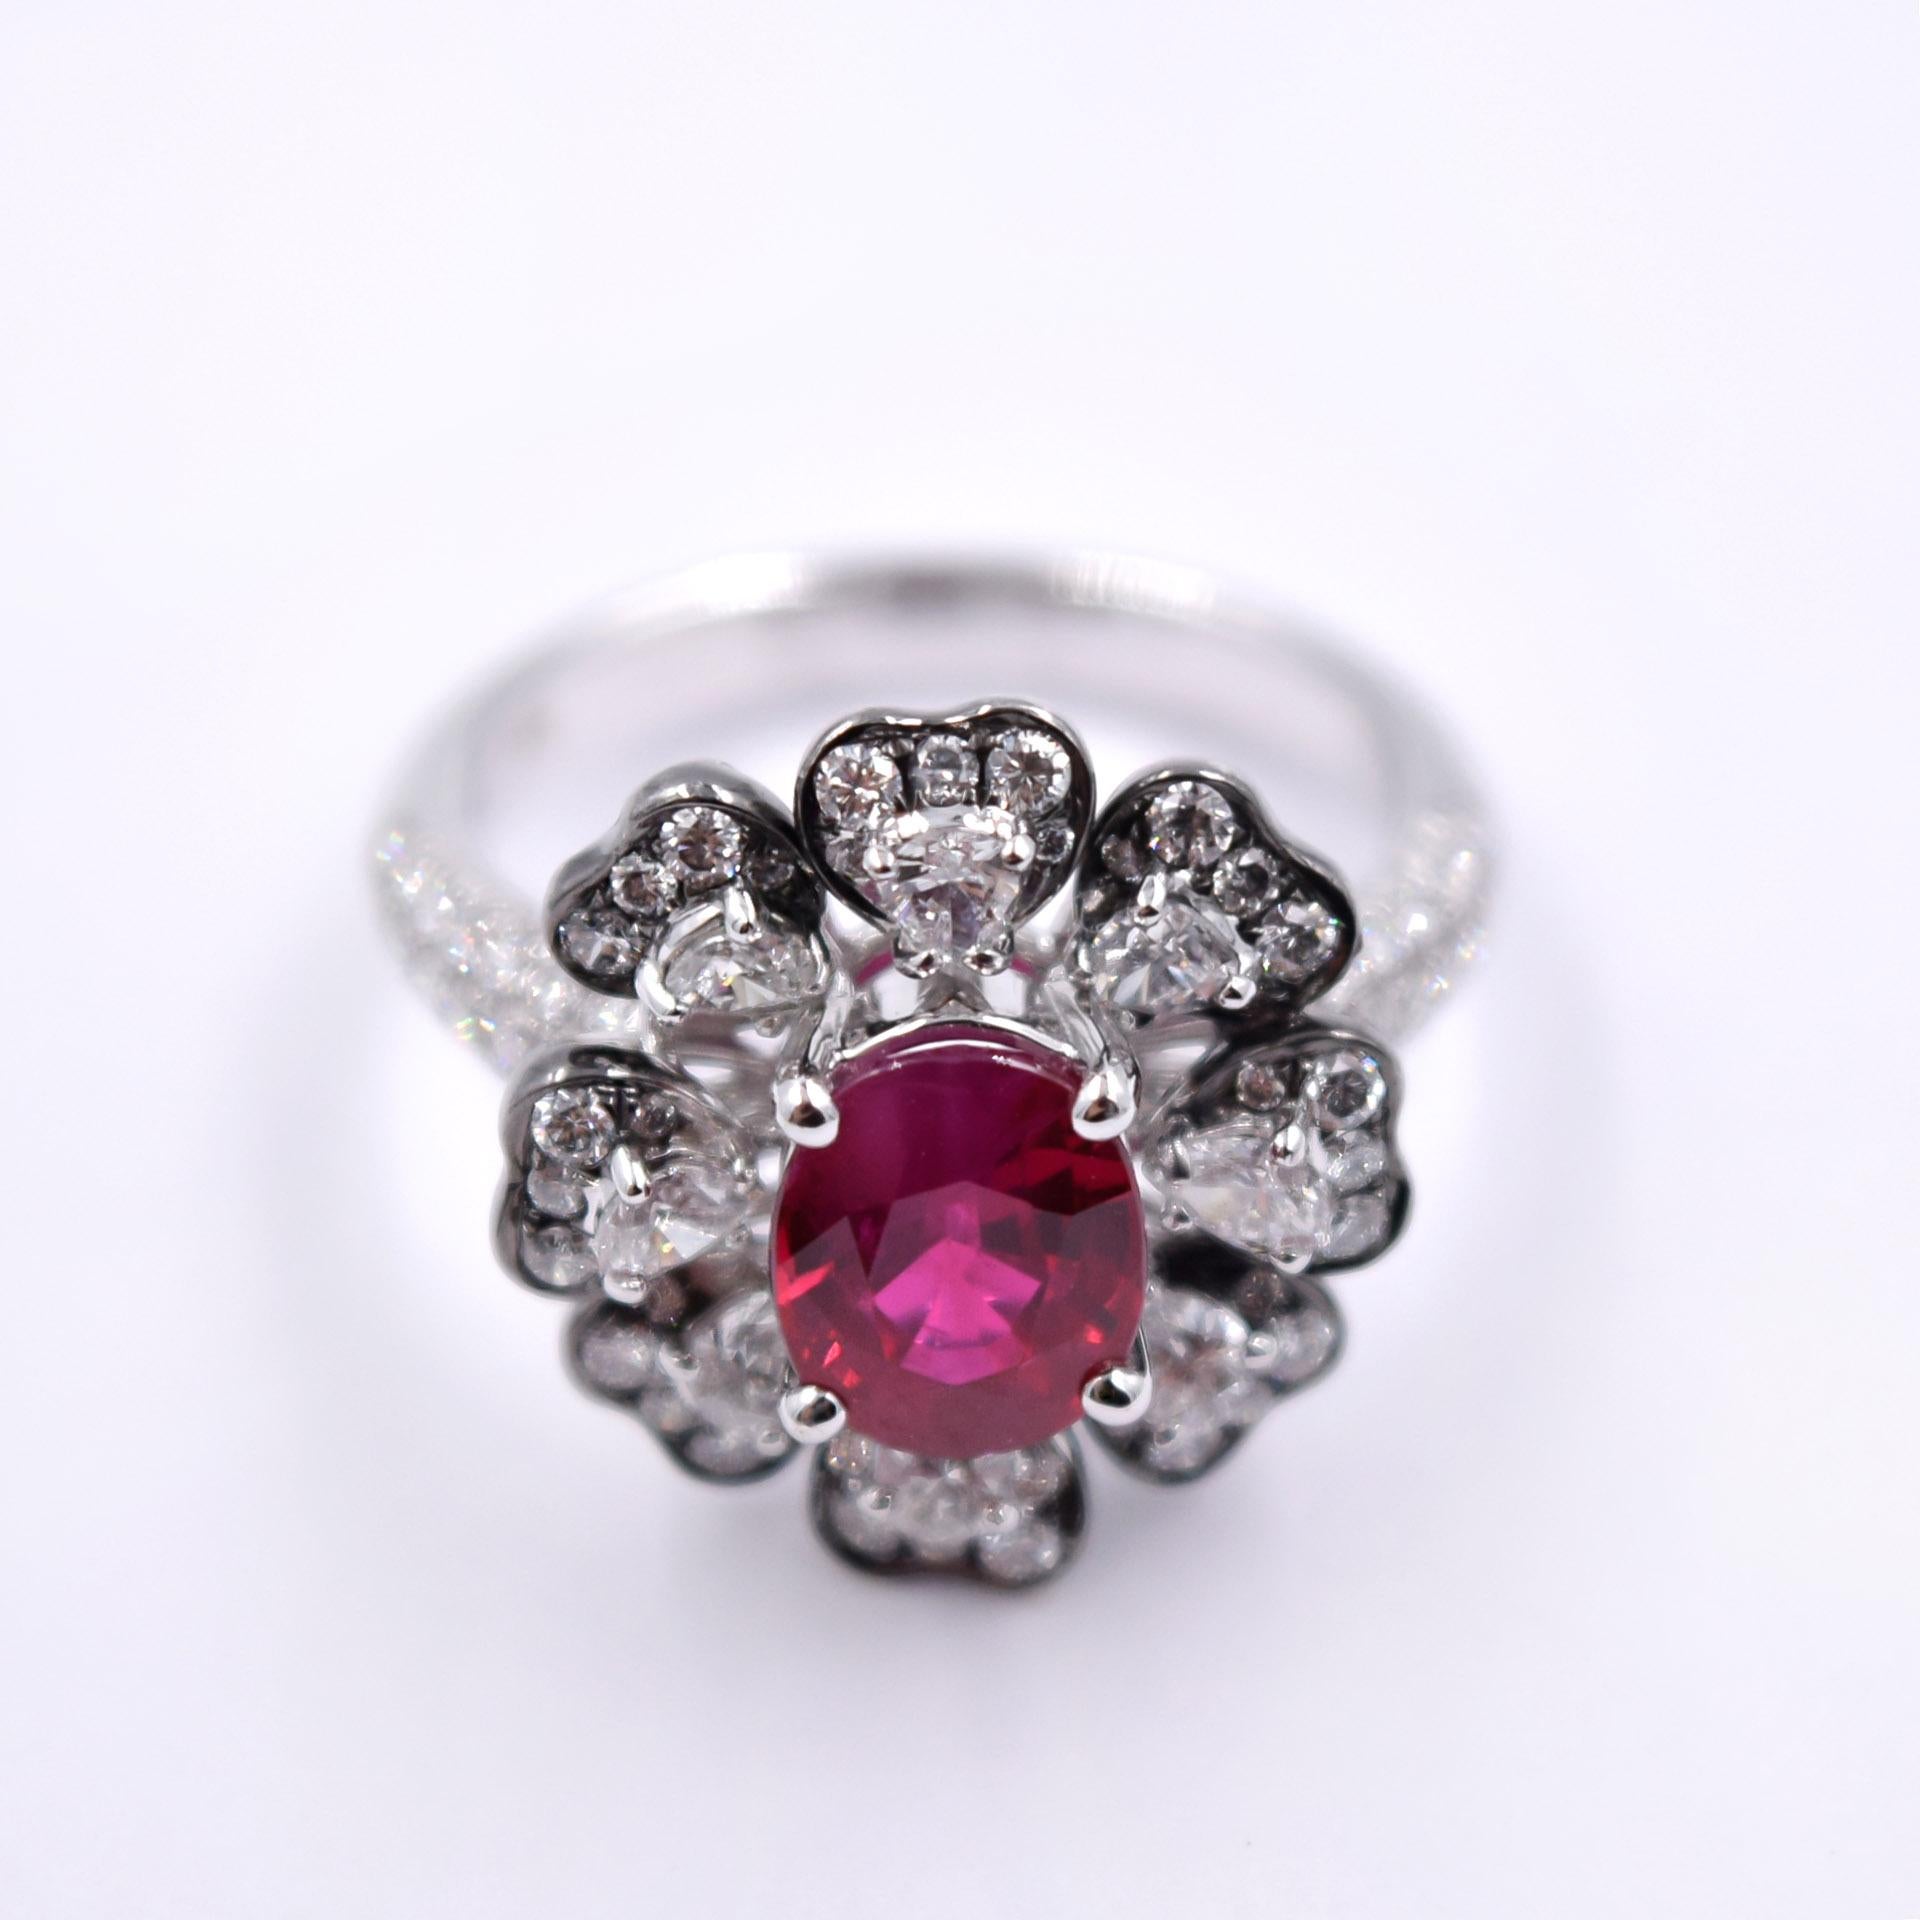 Beautiful flower shaped cocktail ring with white diamonds and a ruby center stone. 
The ruby has a weight of 2.03 carats and is set in a palladium and 18 karat white gold prong setting.
1.08 carats of white diamonds are carefully set around the